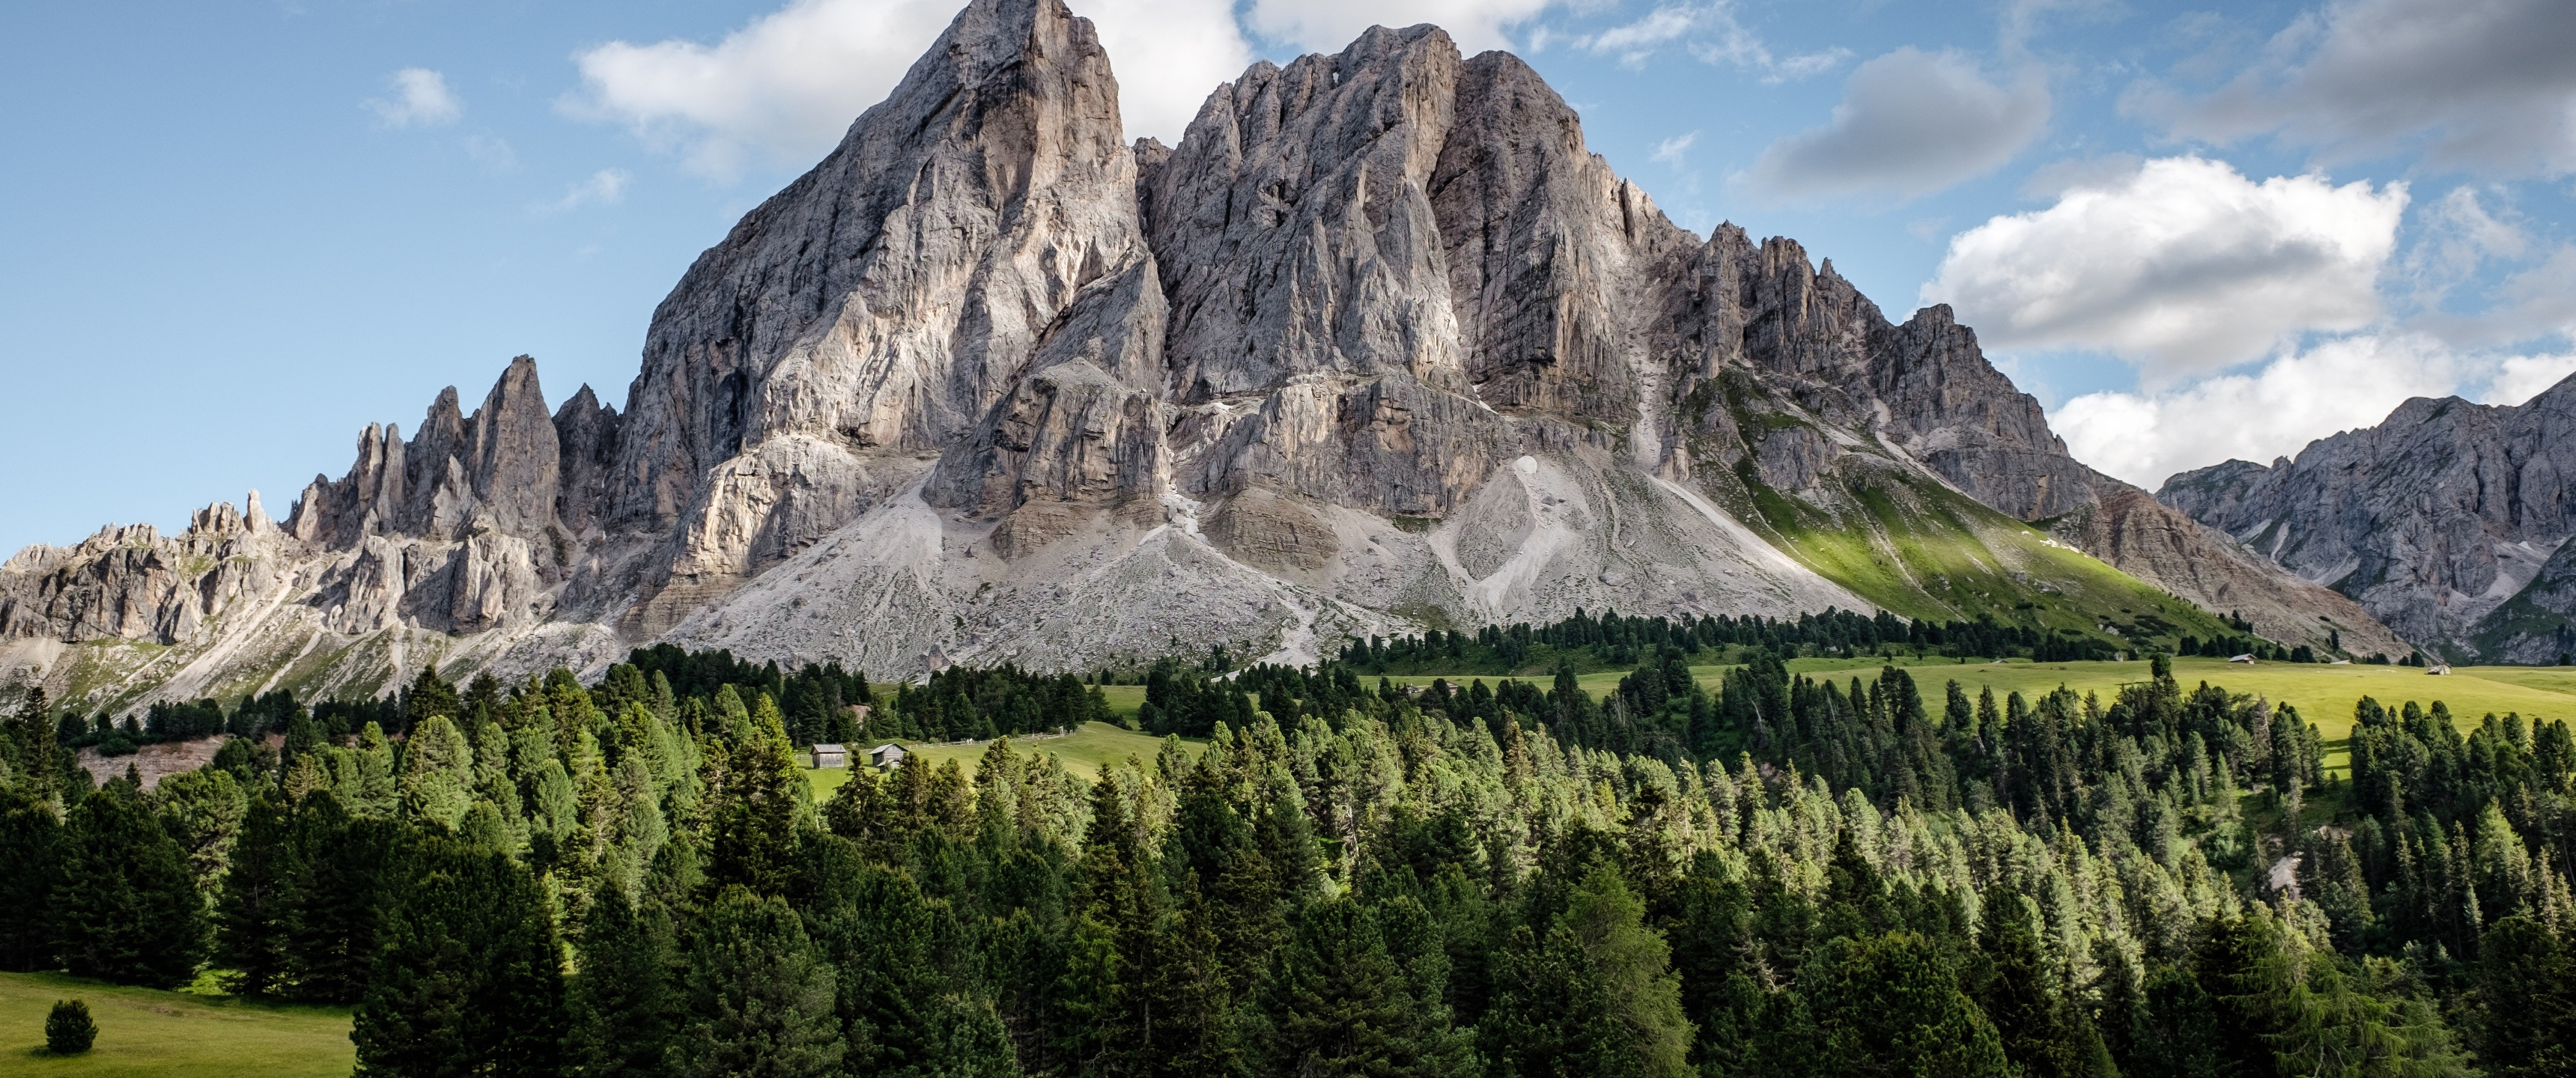 General 3440x1440 ultrawide mountains forest landscape Dolomites nature rocks Italy